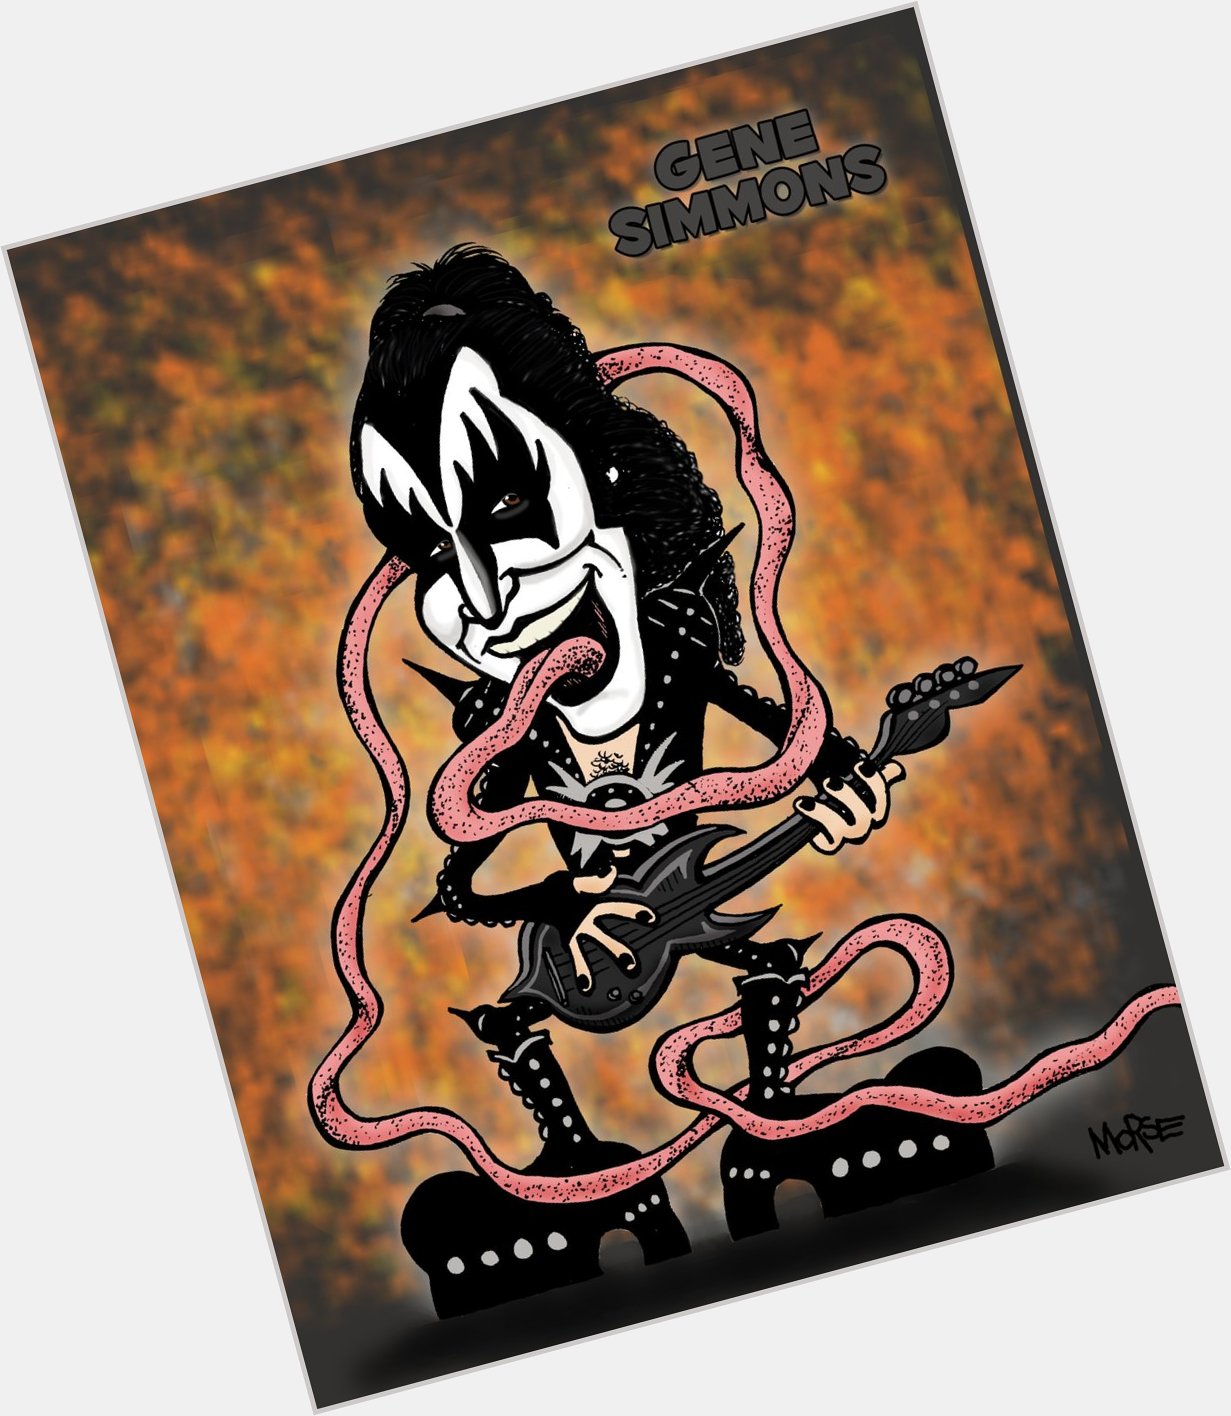 Happy Birthday and a great big KISS to Gene Simmons from
 